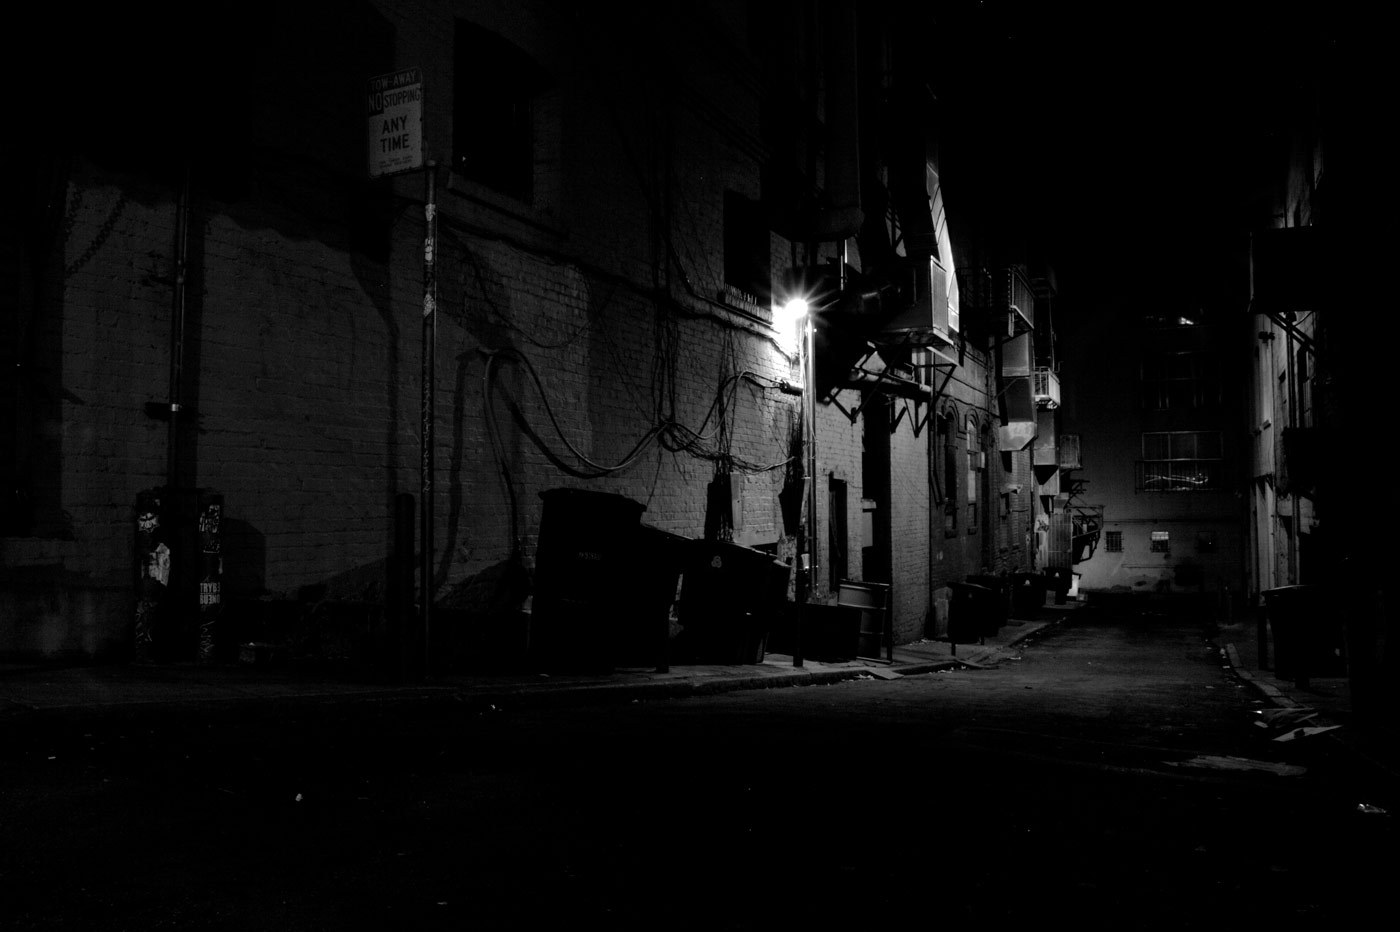  Alley Cellphone FHD pic